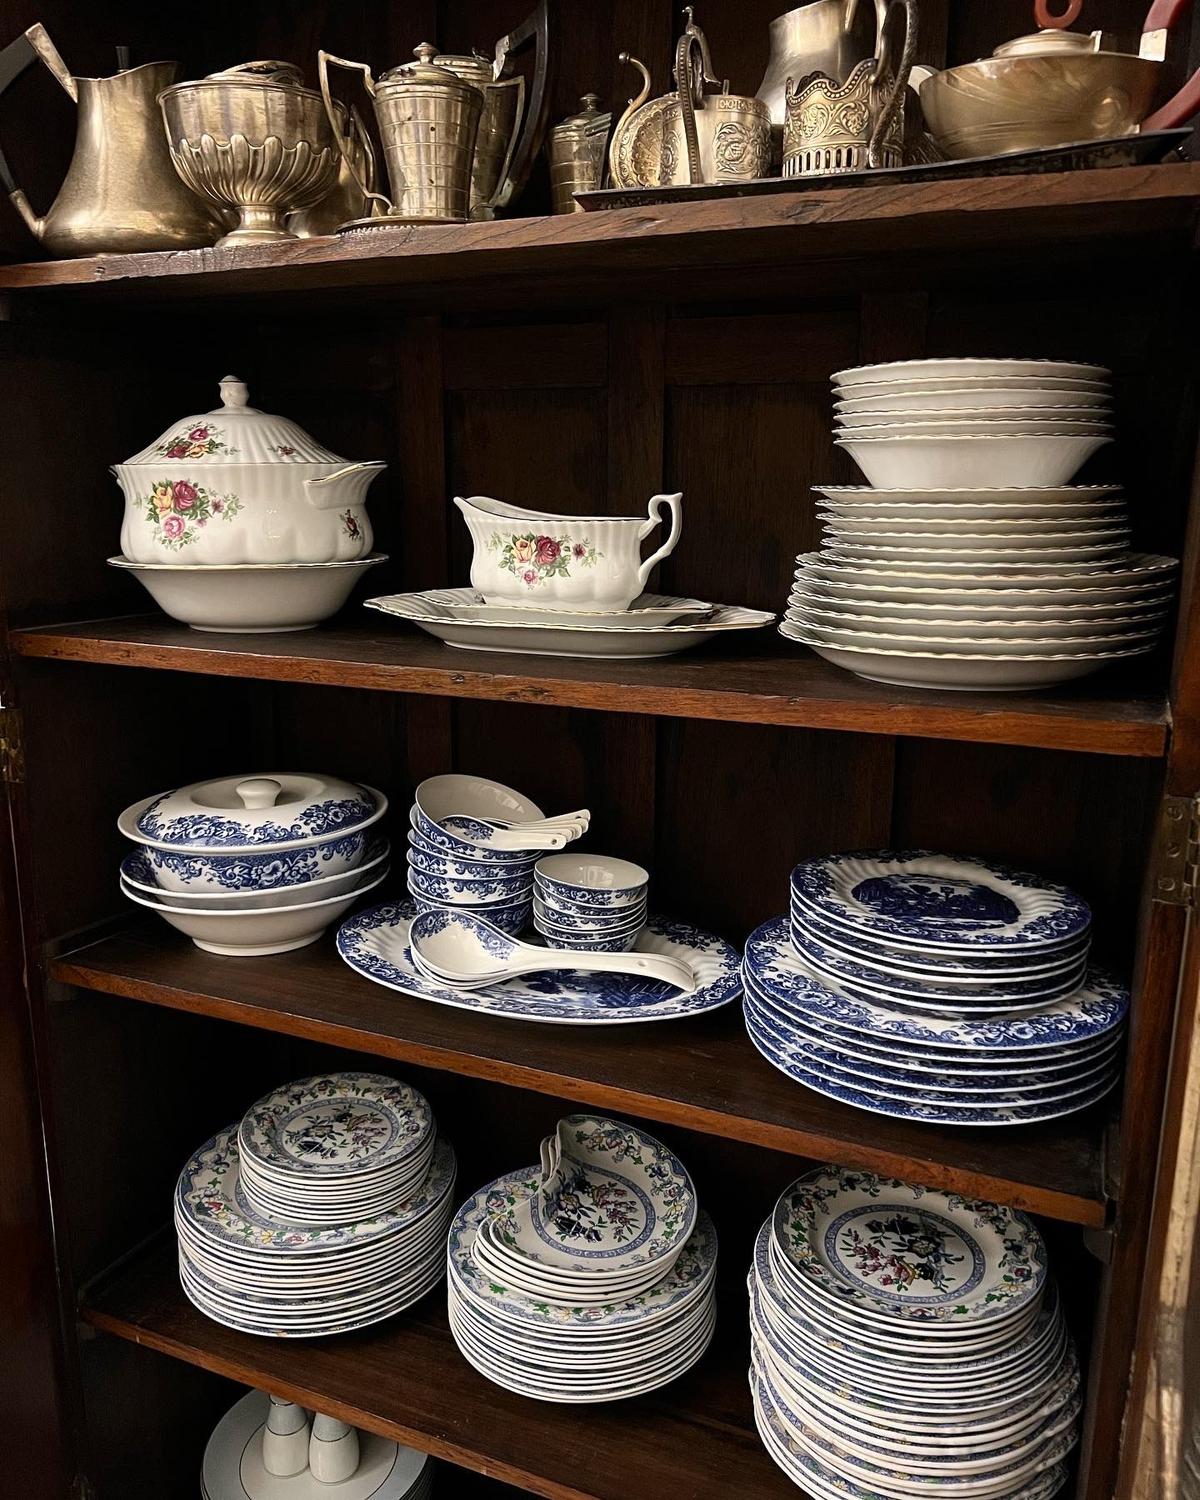 Chef Tejasvi Chandela's personal collection of vintage crockery and a plate from her 'Wisteria' collection